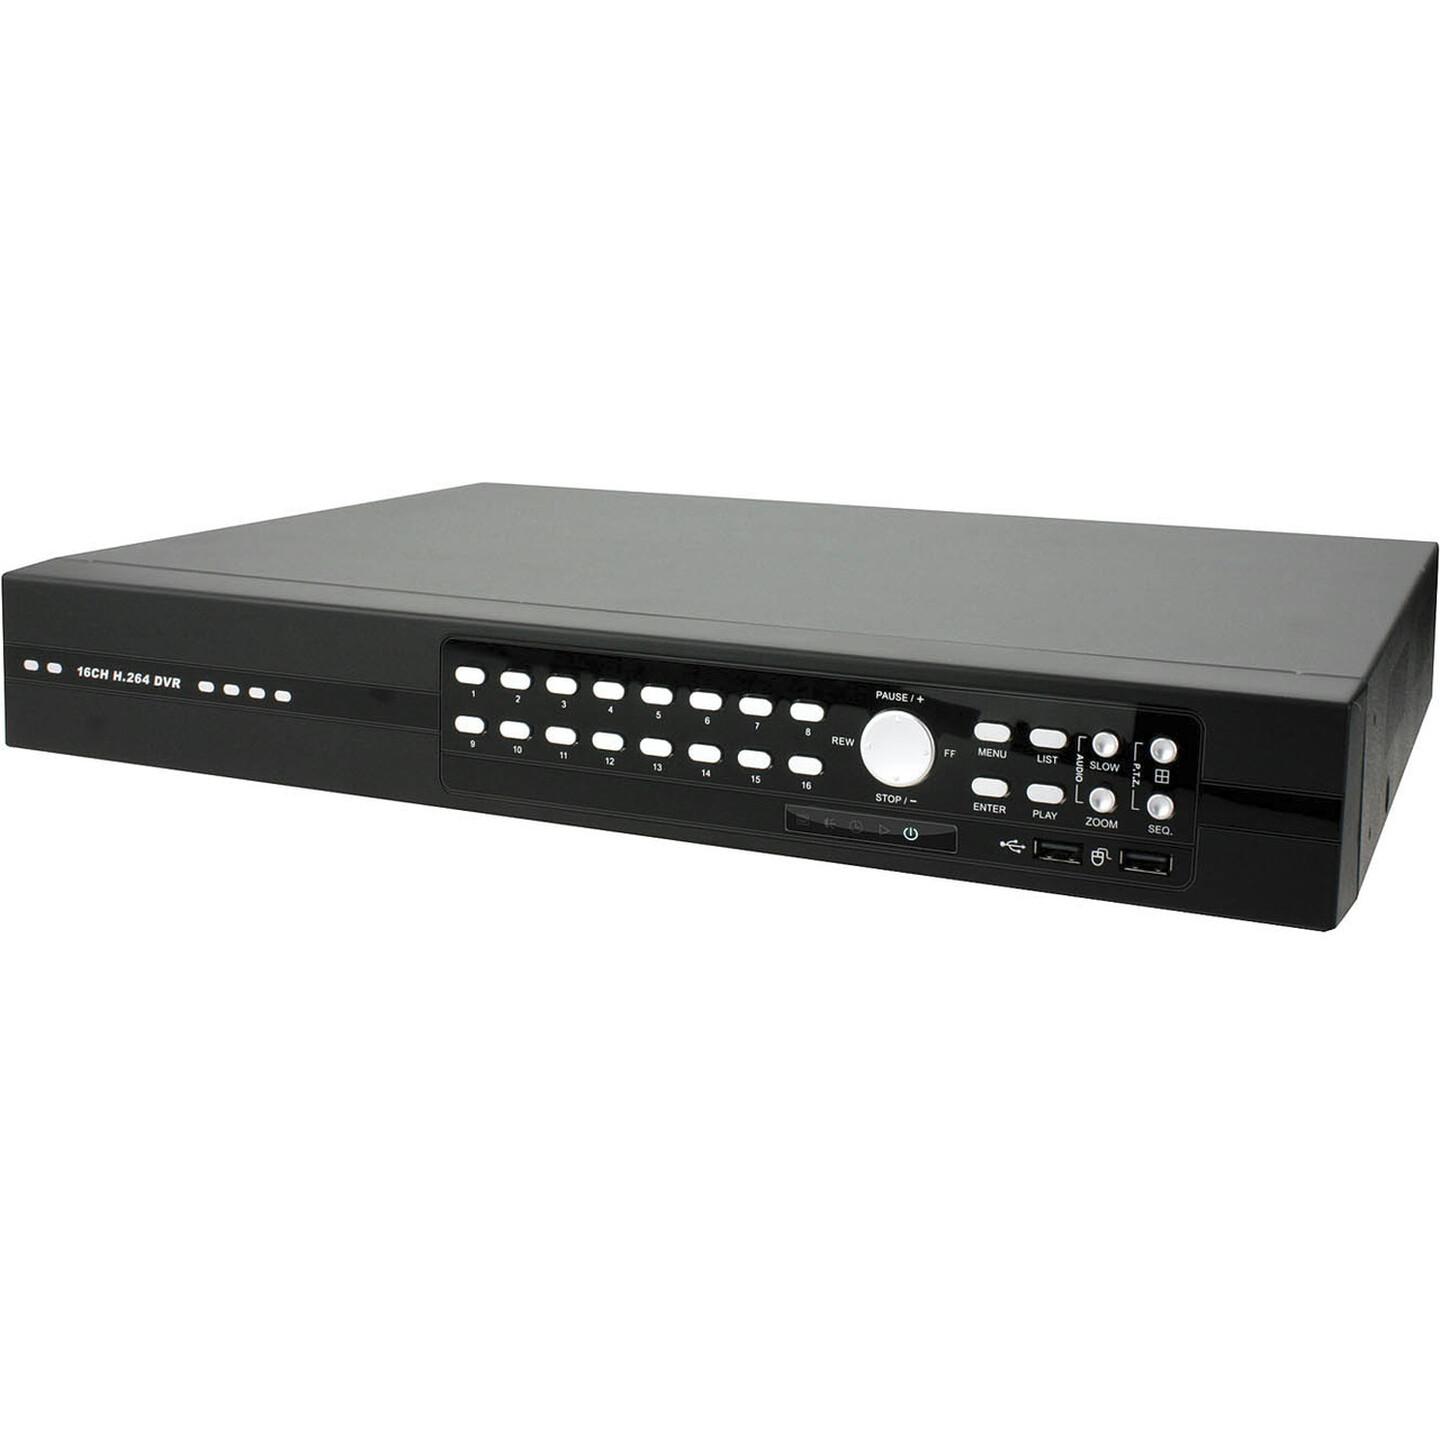 Network 16 Channel H.264 DVR with 500GB Hard Drive